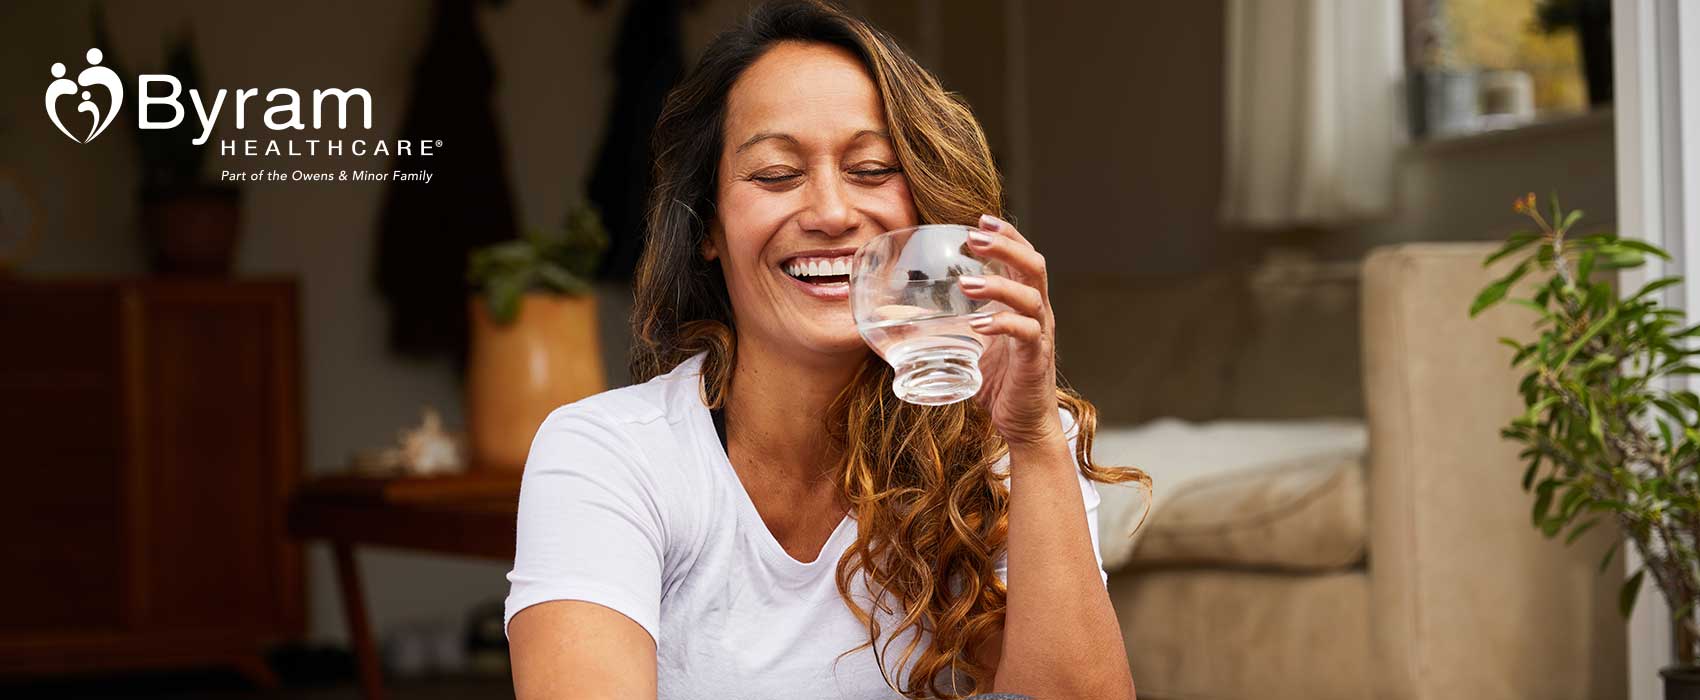 Woman laughing and drinking water.